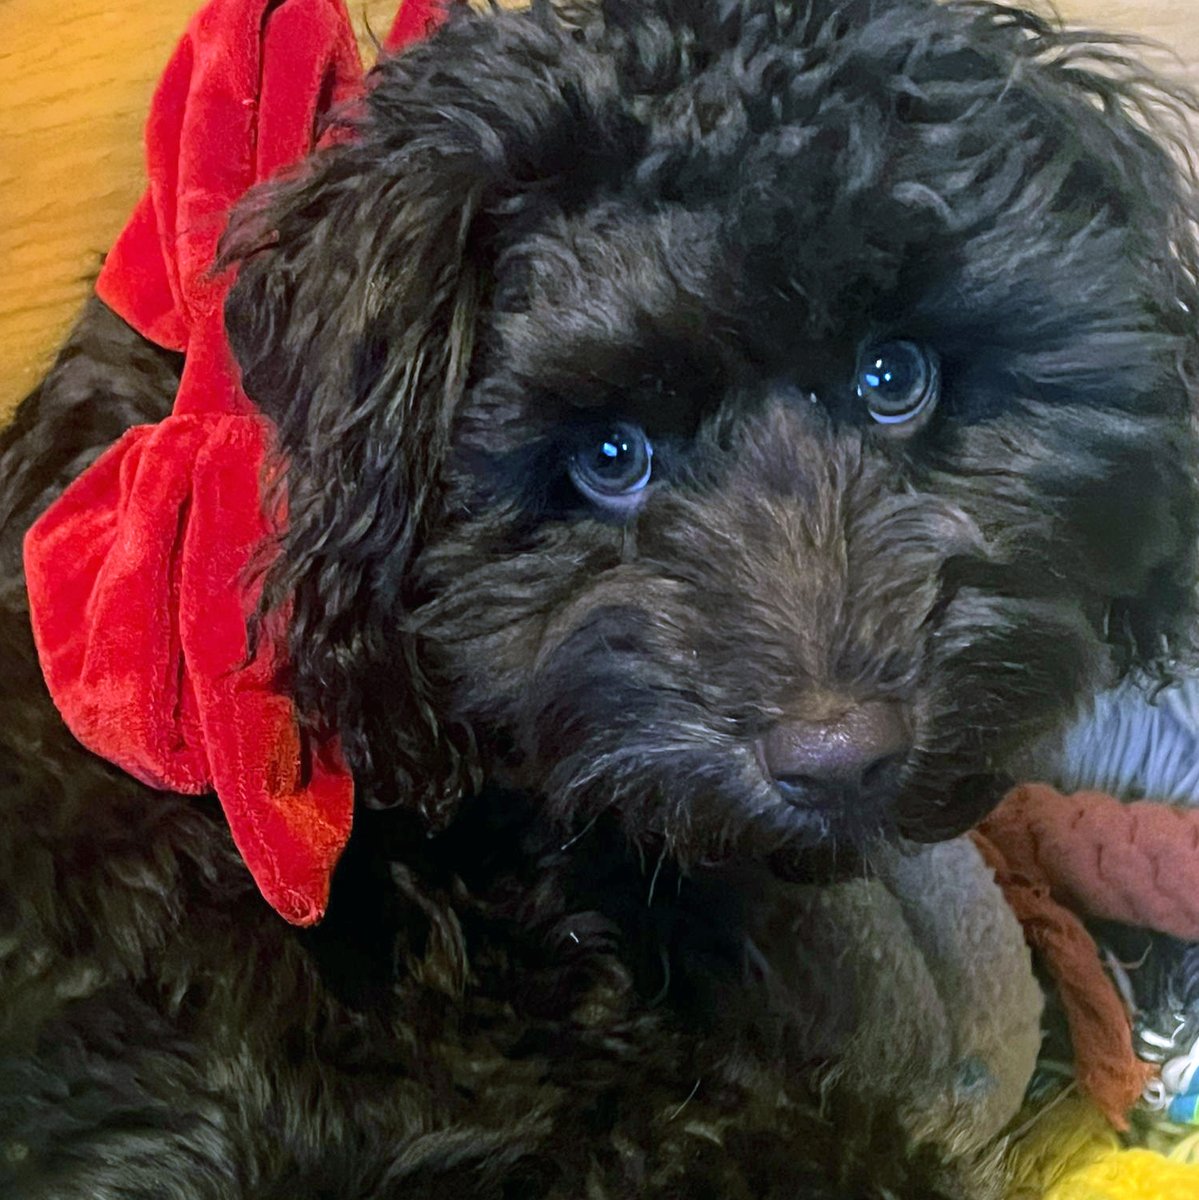 Meet Teddy, modelling Weaving Gold's sumptuous Dog Occasion Wear. He's a 6 months old chocolate brown Schnoodle and what a beauty! Pick up a smart, lightweight, beautiful velvet bow in red and green from North Cross Rd, Saturday and Herne Hill Market on Sunday. #eastdulwichdogs